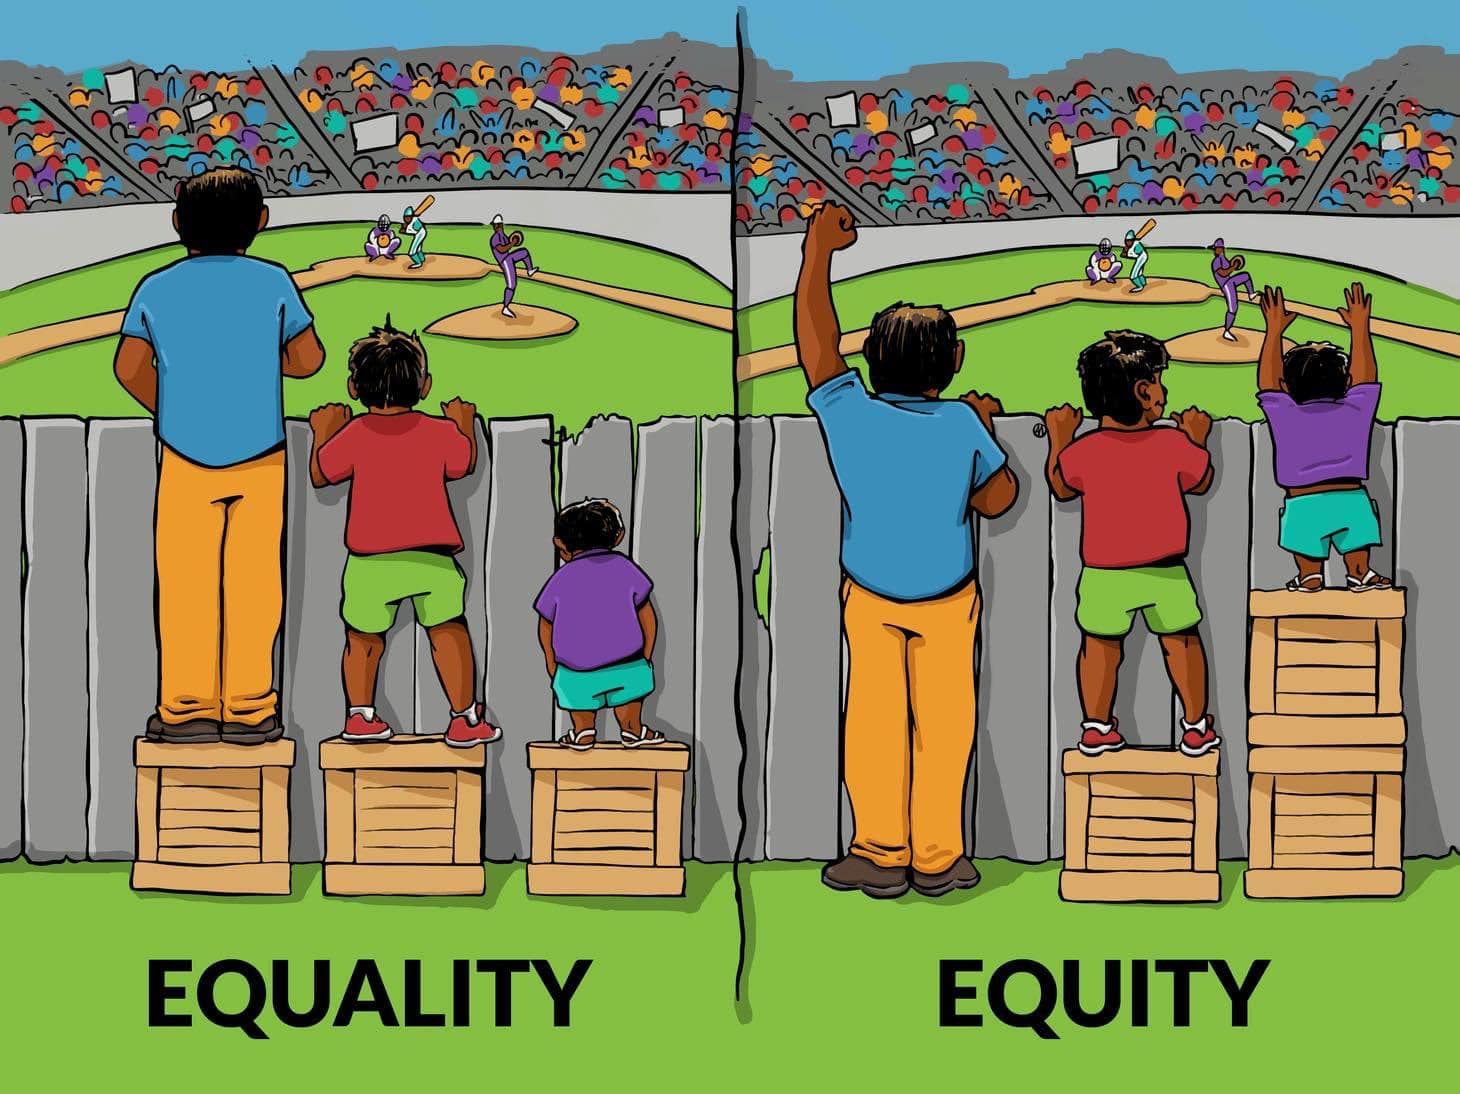 Interview with Julie Castro Abrams on women leaders, minorities, equity and diversity. (Image showing inequity among 3 people looking at a game over fence.)